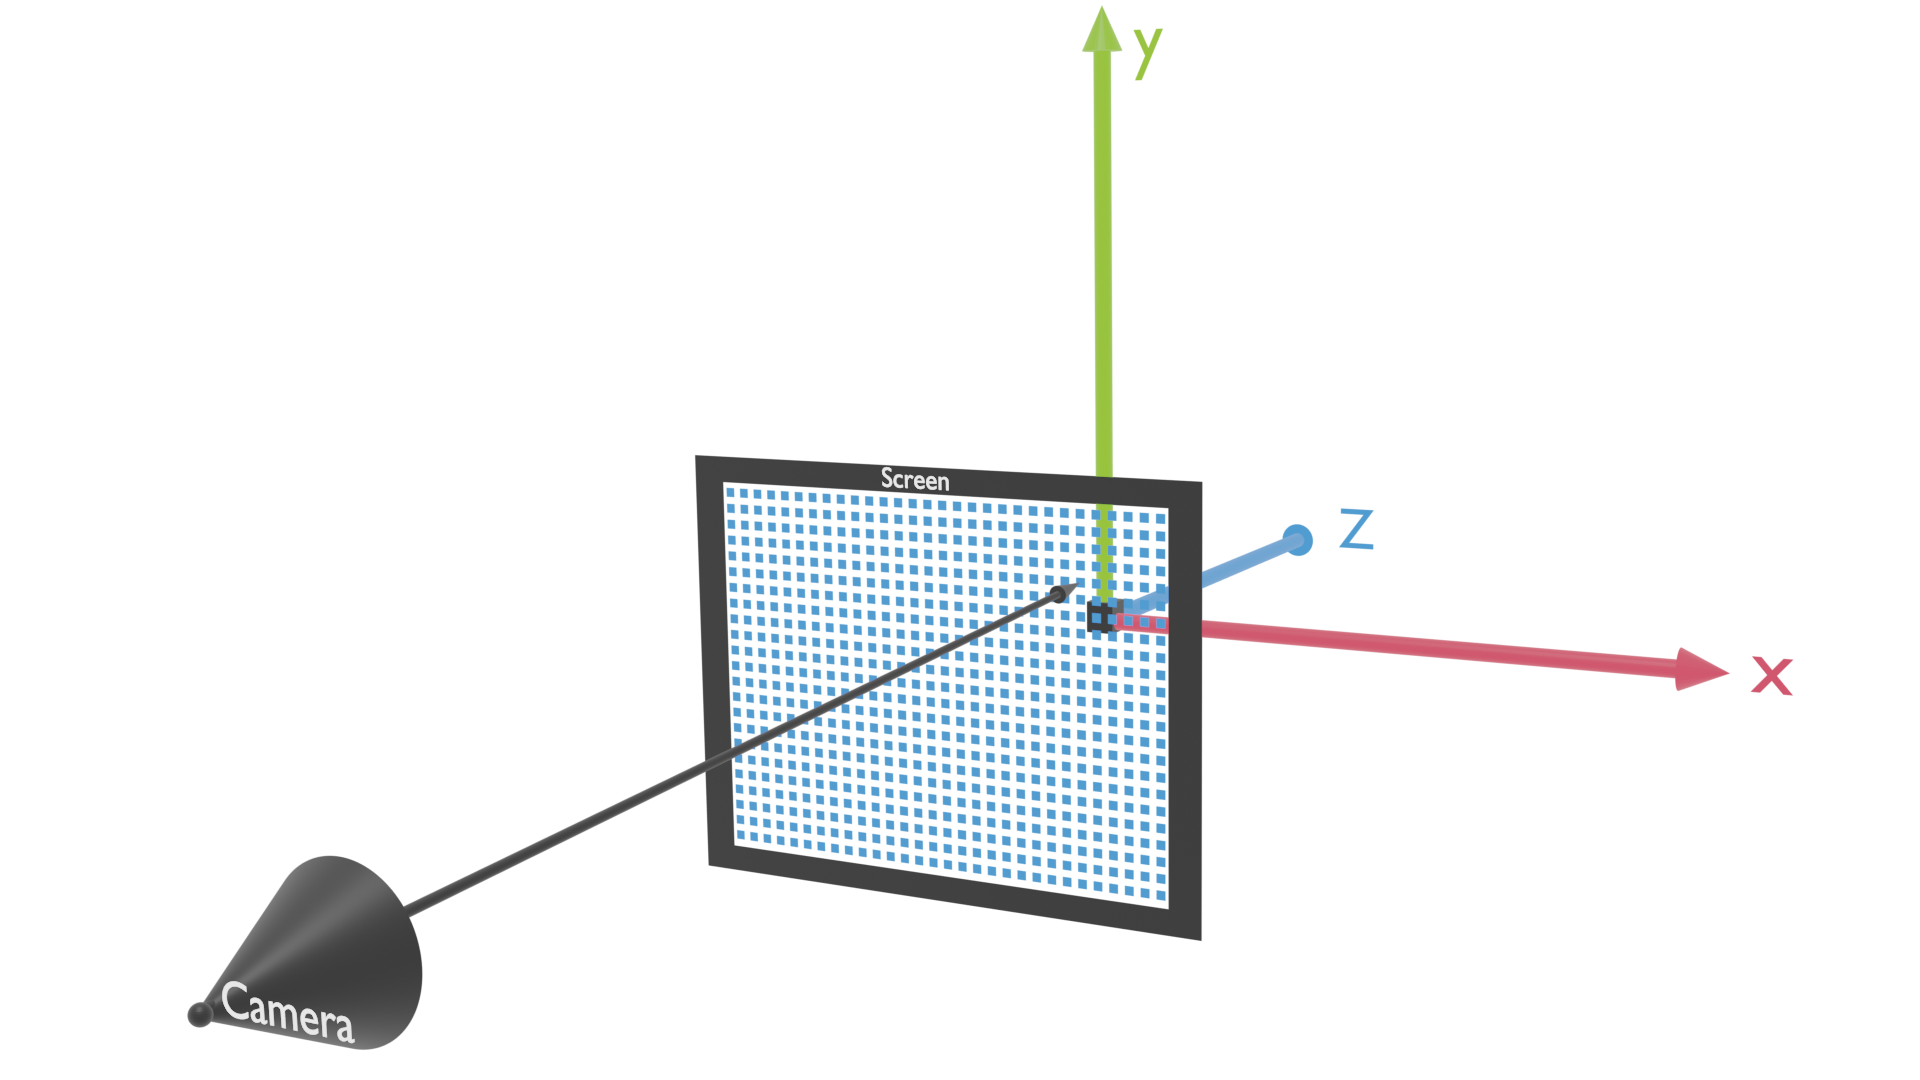 An XYZ-coordinate system with a camera at roughly 0, 0, -3 and a screen at 0, 0, -1.5. A ray is drawn from the camera to a pixel of the screen